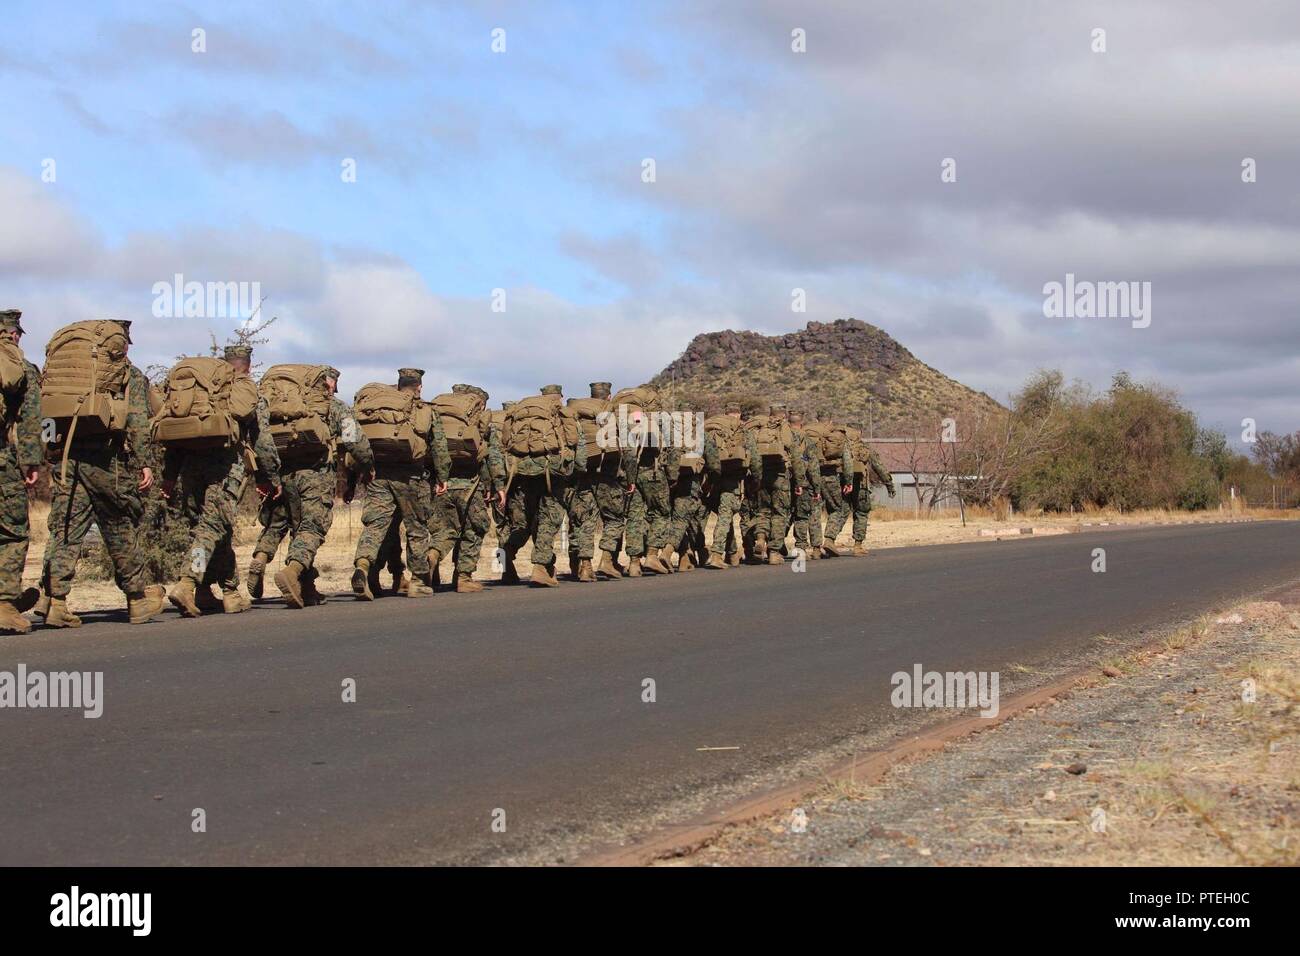 U.S. Marines assigned to 3rd Battalion, 25th Marines, conduct a three mile conditioning hike as part of Shared Accord 17 (SA17) at South African Army Combat Training Center, Lohatla, South Africa, July 16, 2017. SA17 is a Joint bi-lateral Field Training Exercise with our South African partners focused on Peace Keeping Operations designed to exercise participants’ capability and capacity to conduct African Union / United Nations mandated Peace Keeping Operations. Stock Photo